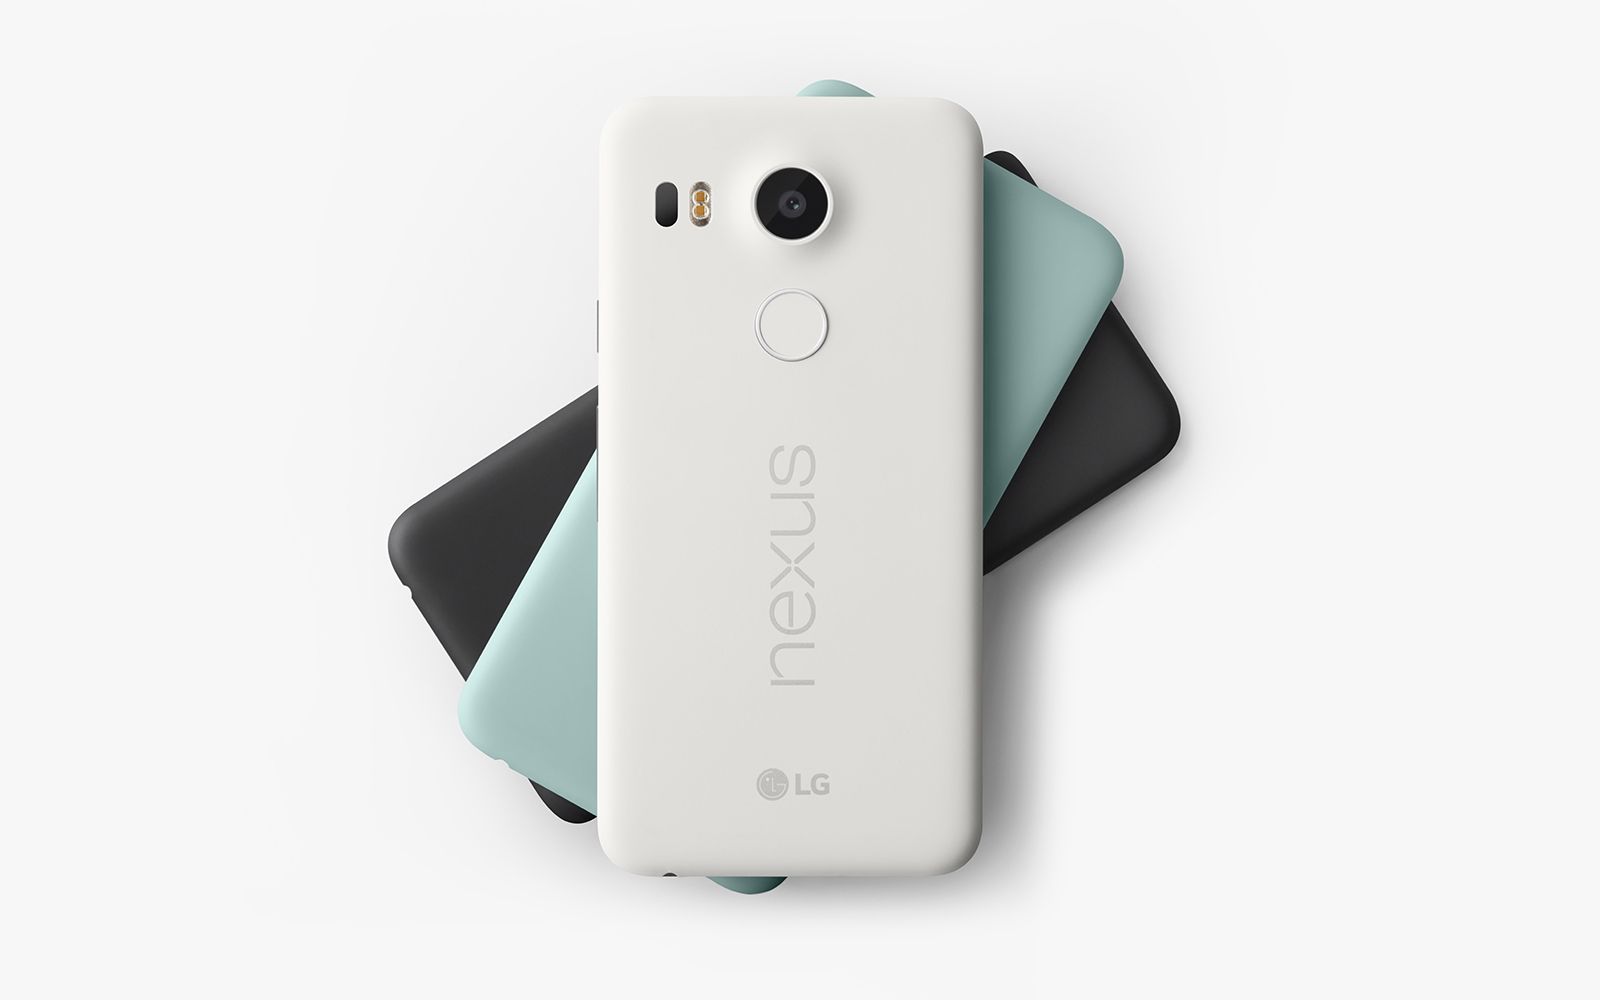 nexus 5x official price release date specs and everything you need to know image 2